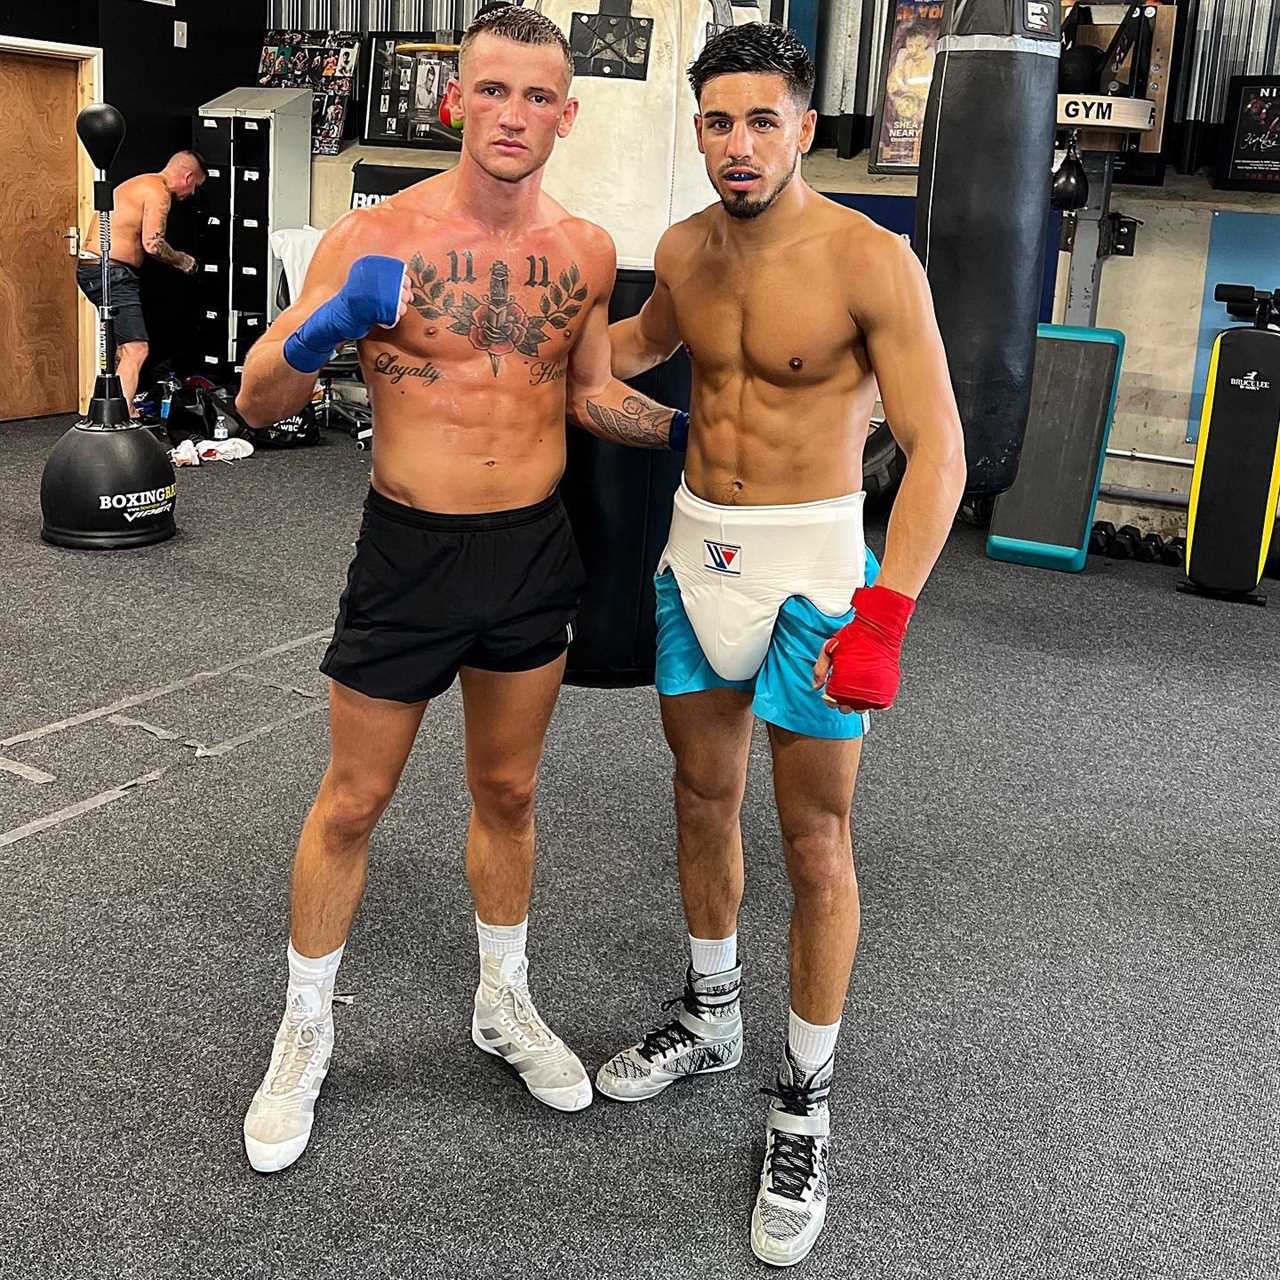 Jordan Flynn is a British Sikh boxer who has never lost to Anthony Joshua's agency. He is determined to rise up the ranks.